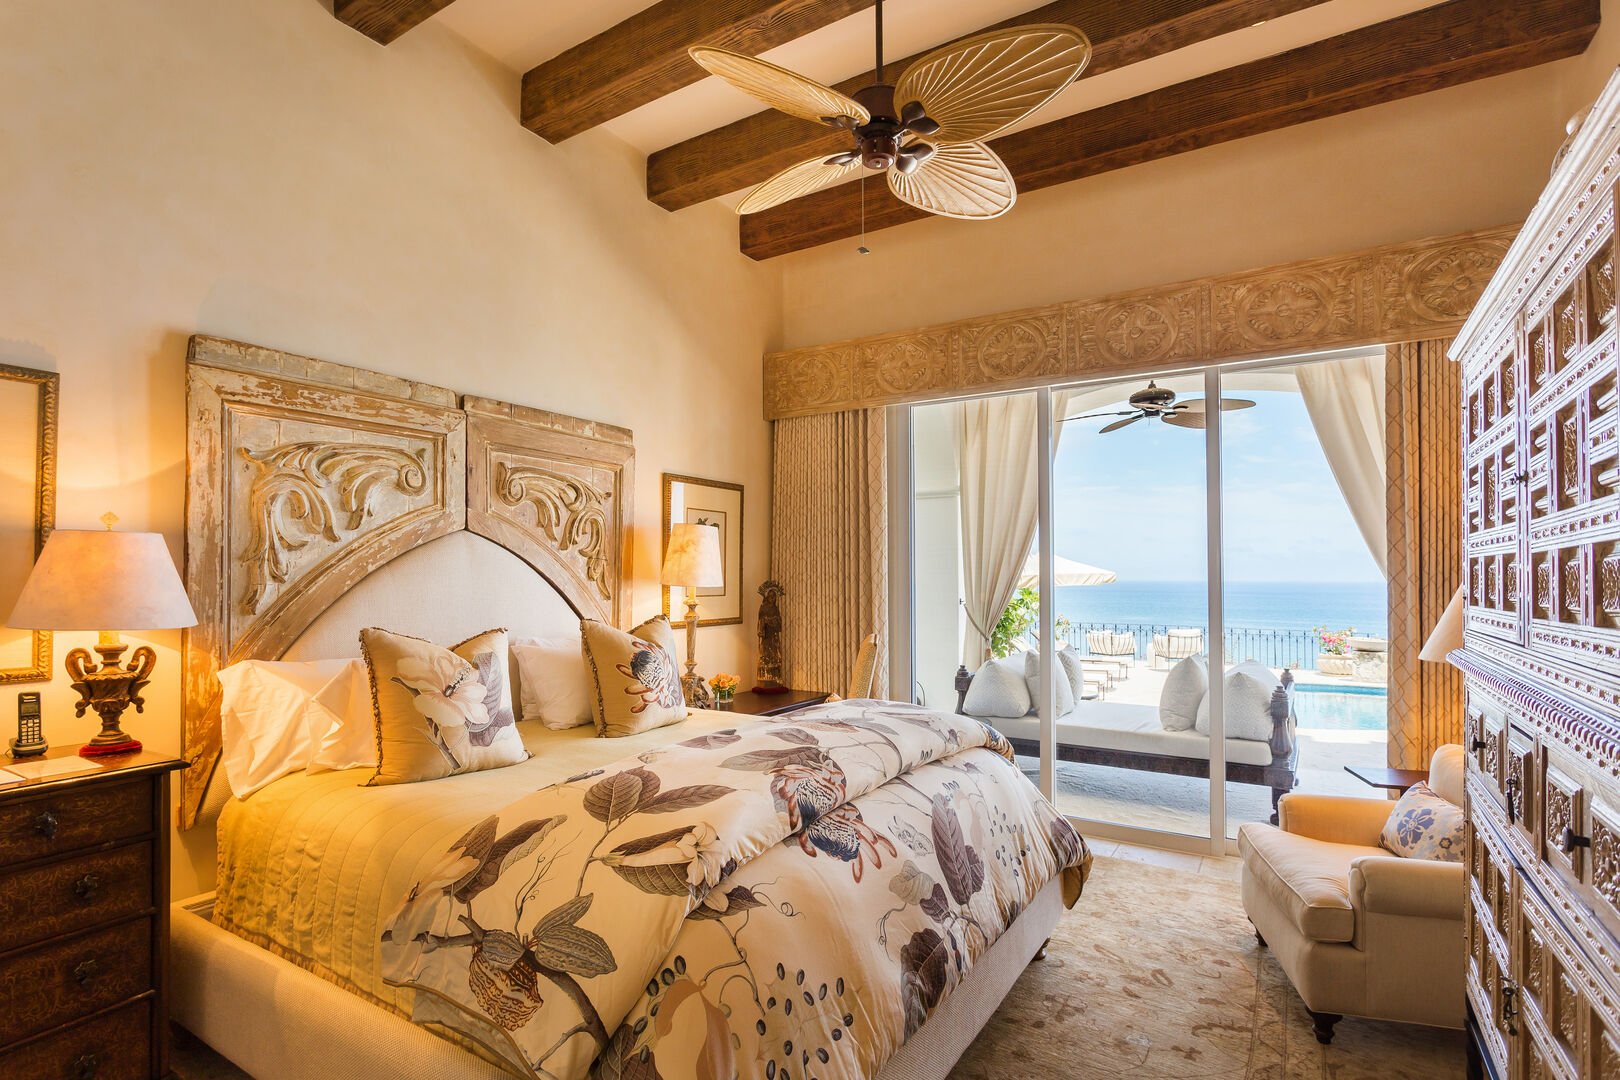 Bedroom with access to a terrace with ocean views, a large bed, armoire, and ceiling fan